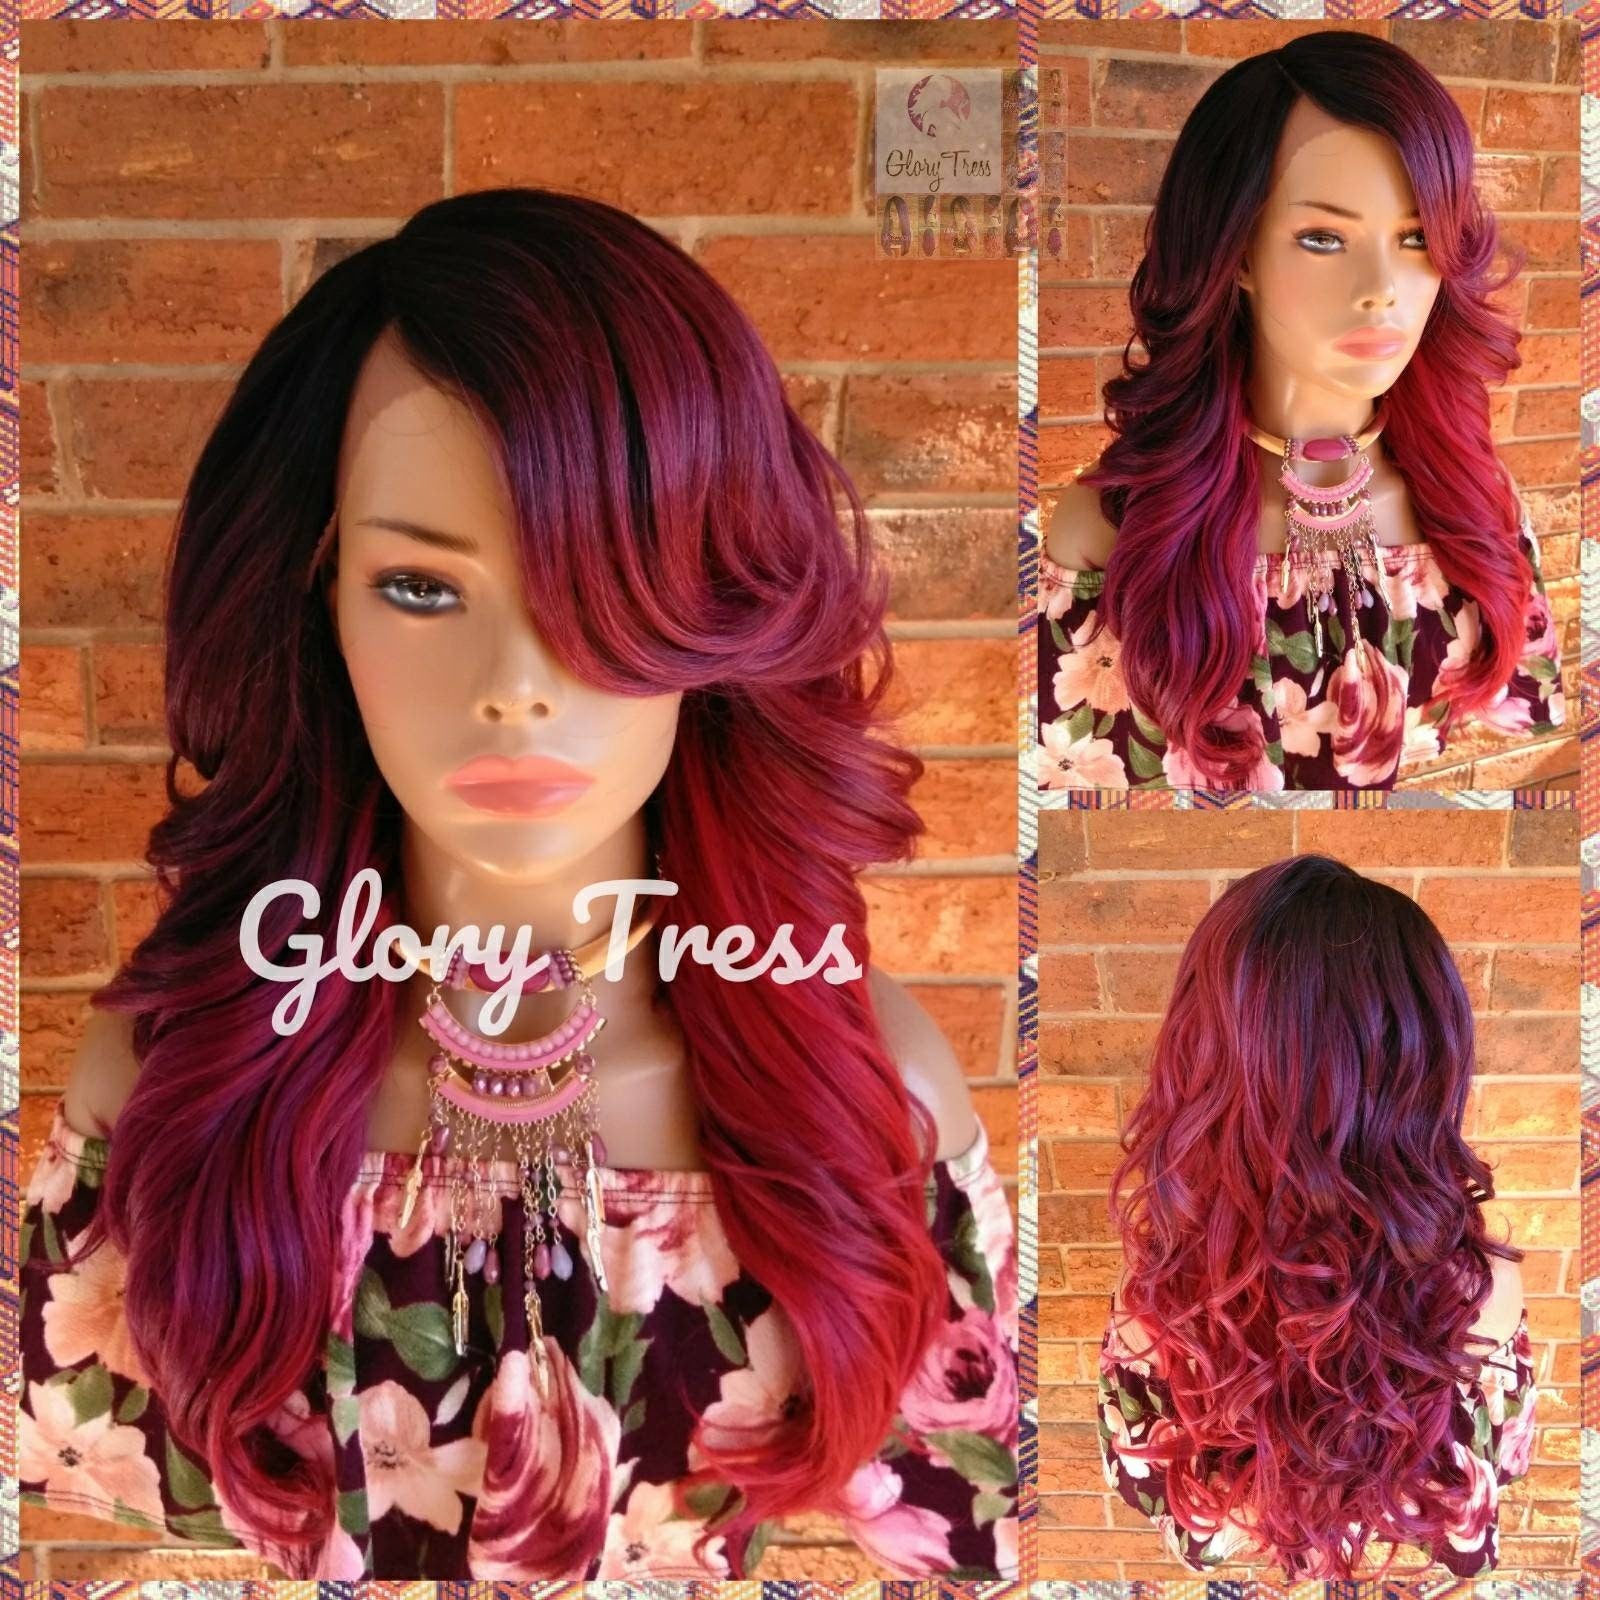 Long & Curly Lace Front Wig, Glory Tress, Ombre Wine Wig, Burgundy Wig, Dark Rooted Wig, Glory Tress // SALVATION